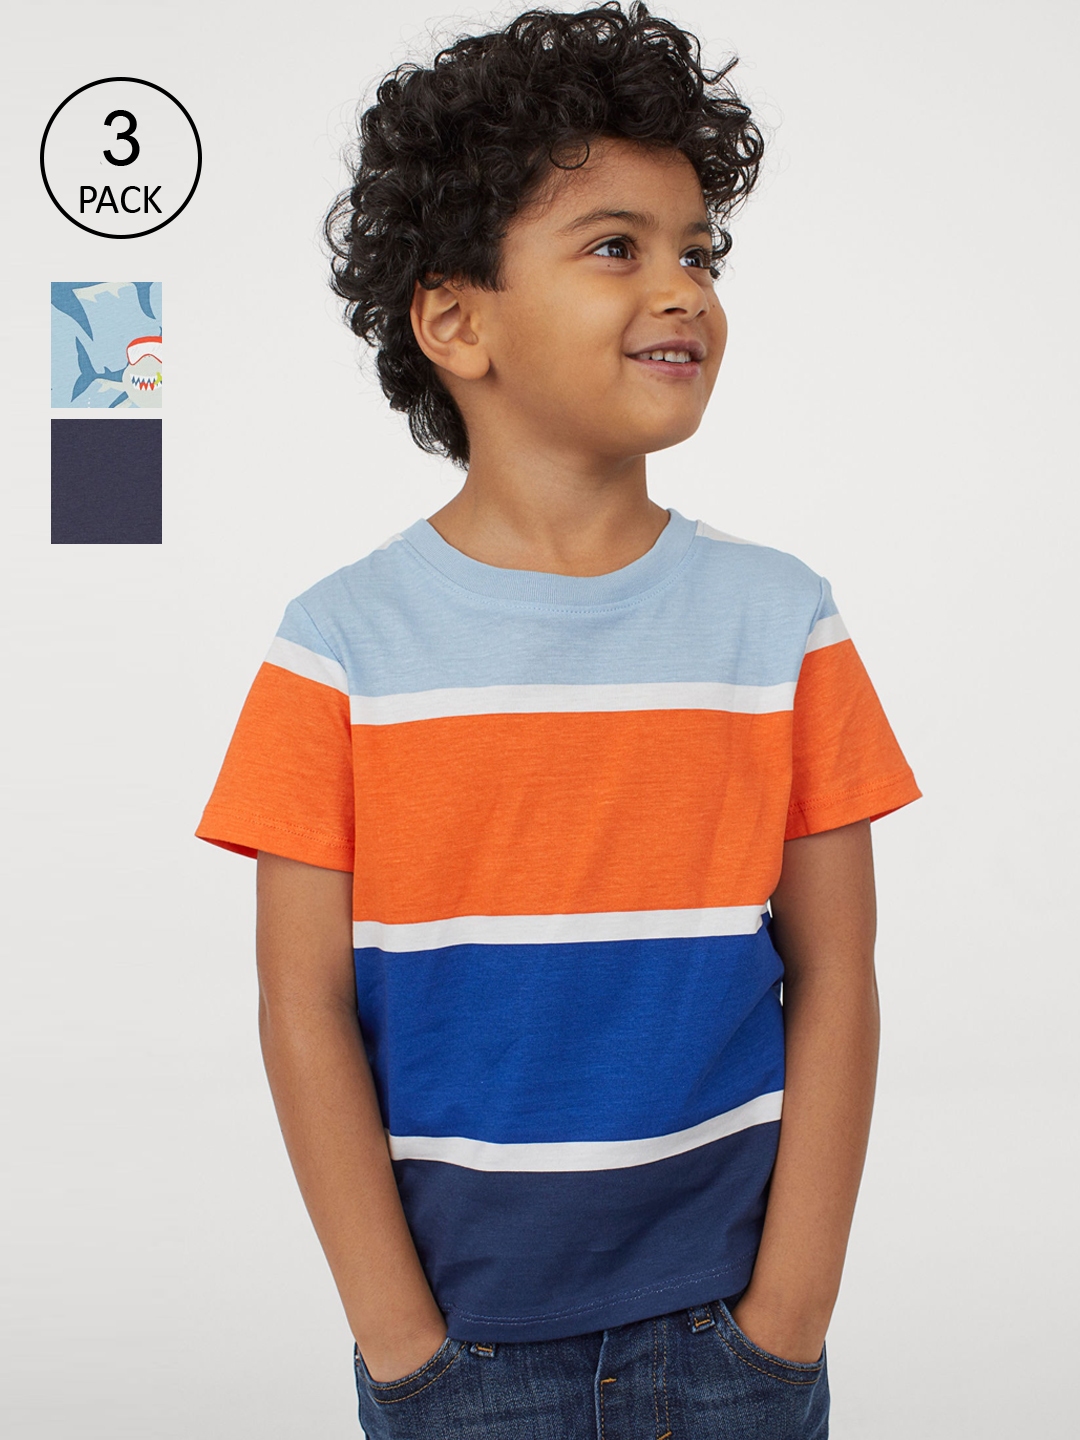 Buy 3 Pack Cotton Pure Cotton T Shirts - Tshirts for Boys 13346948 | Myntra